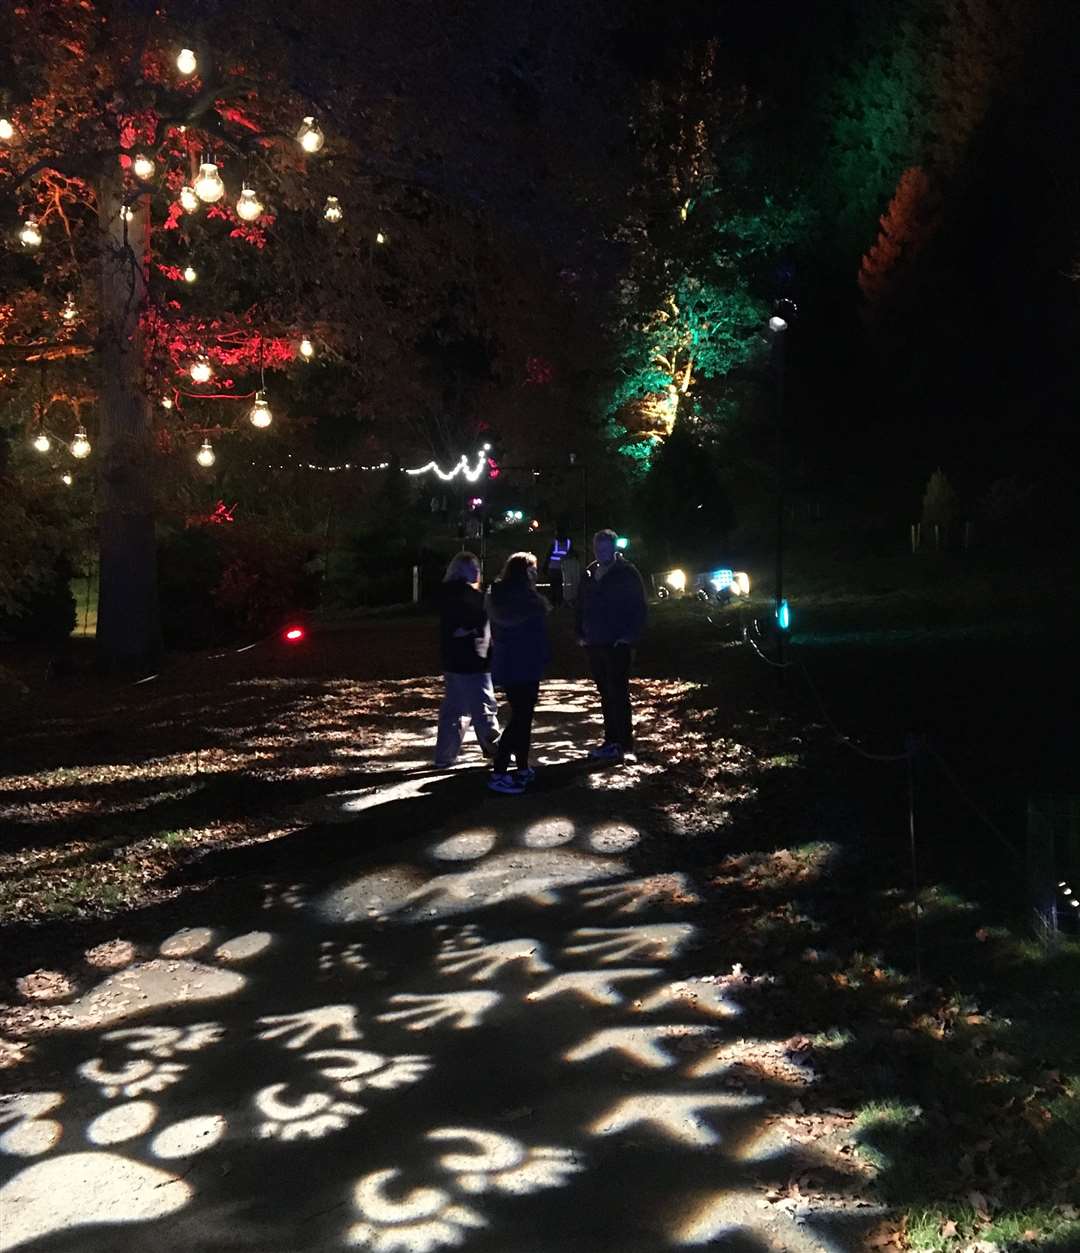 You can walk as slowly as you like around Christmas at Bedgebury Picture: Angela Cole/KMG